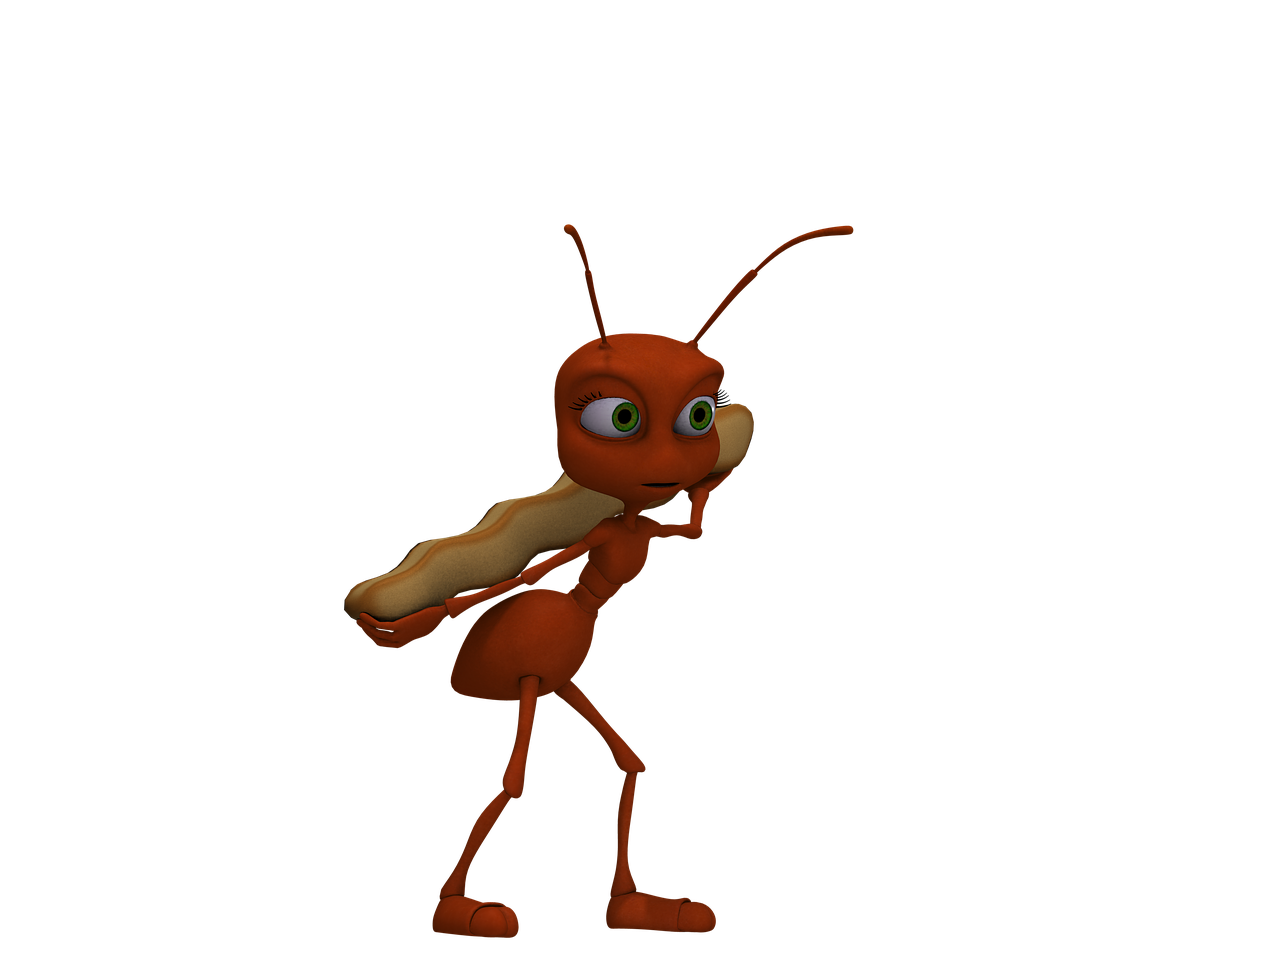 Ant Red PNG Image High Quality PNG Image